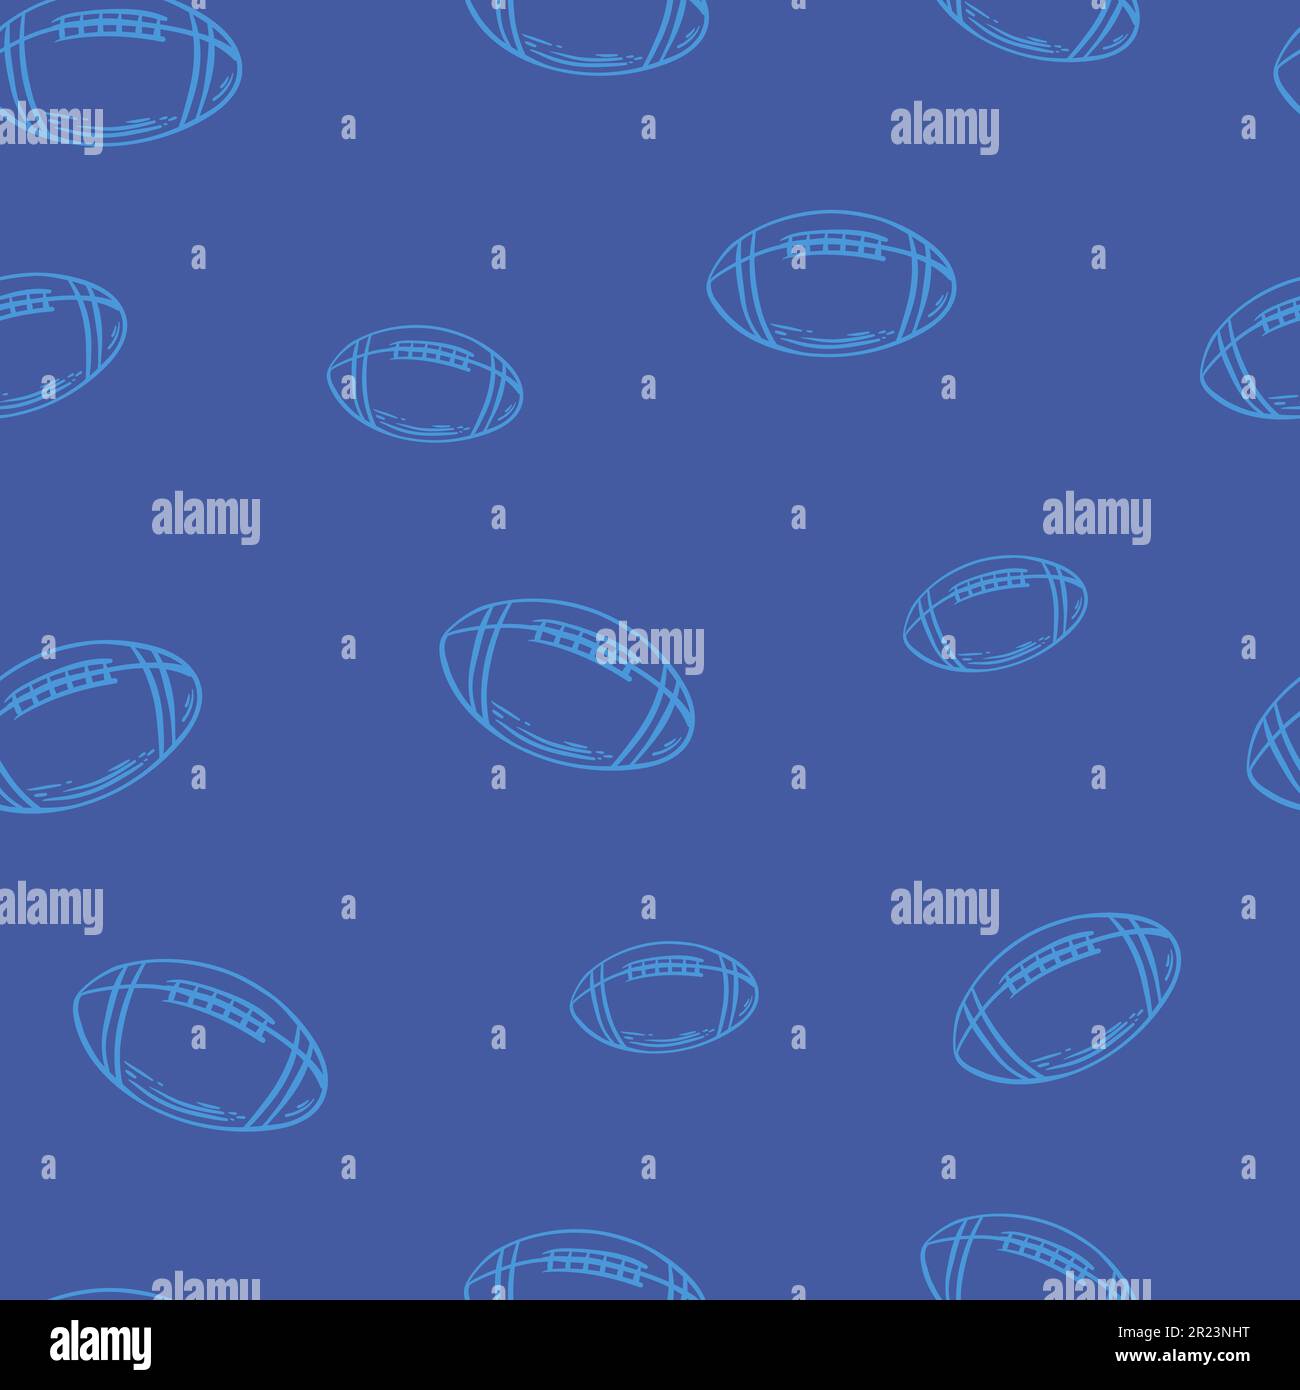 American football wallpaper design vector image. Repeating tile background of rugby balls seamless pattern texture. Stock Vector